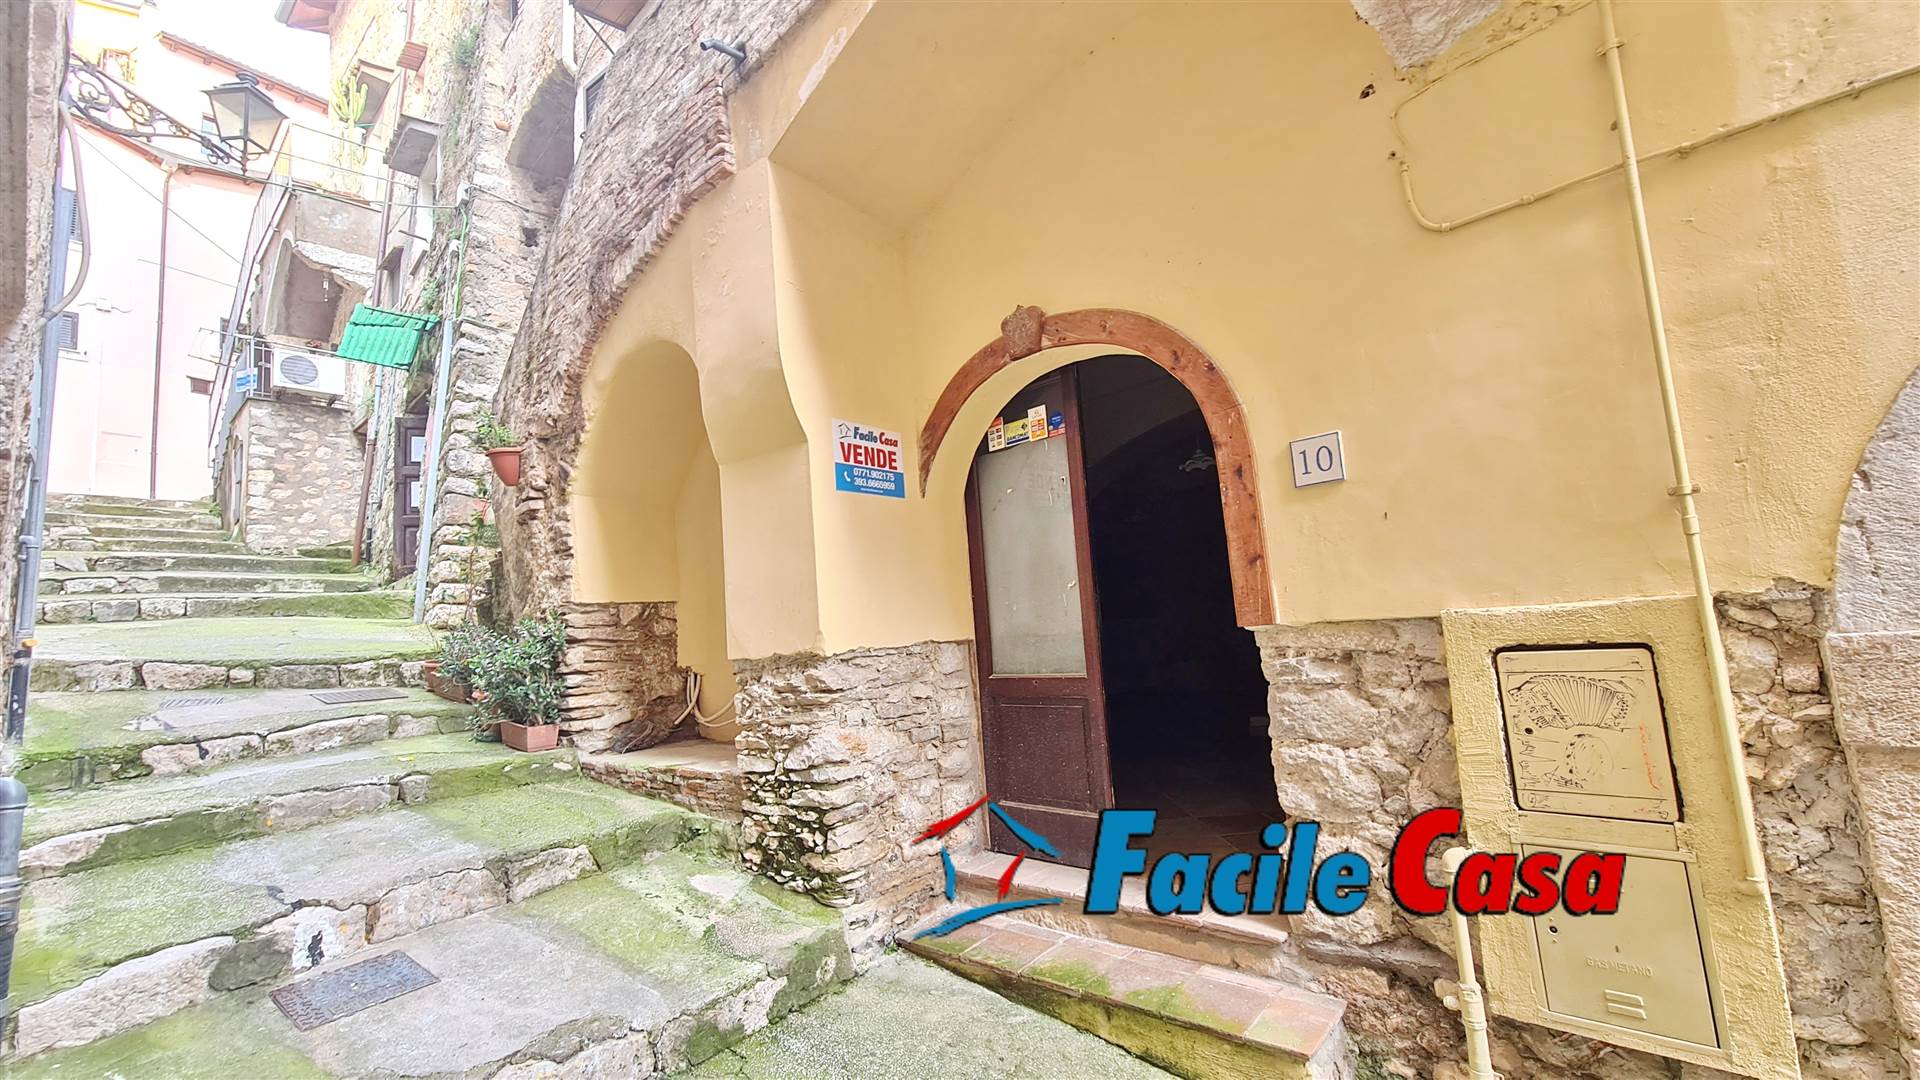 MARANOLA, FORMIA, Commercial property for sale of 76 Sq. mt., Good condition, Heating Individual heating system, Energetic class: G, placed at Ground,